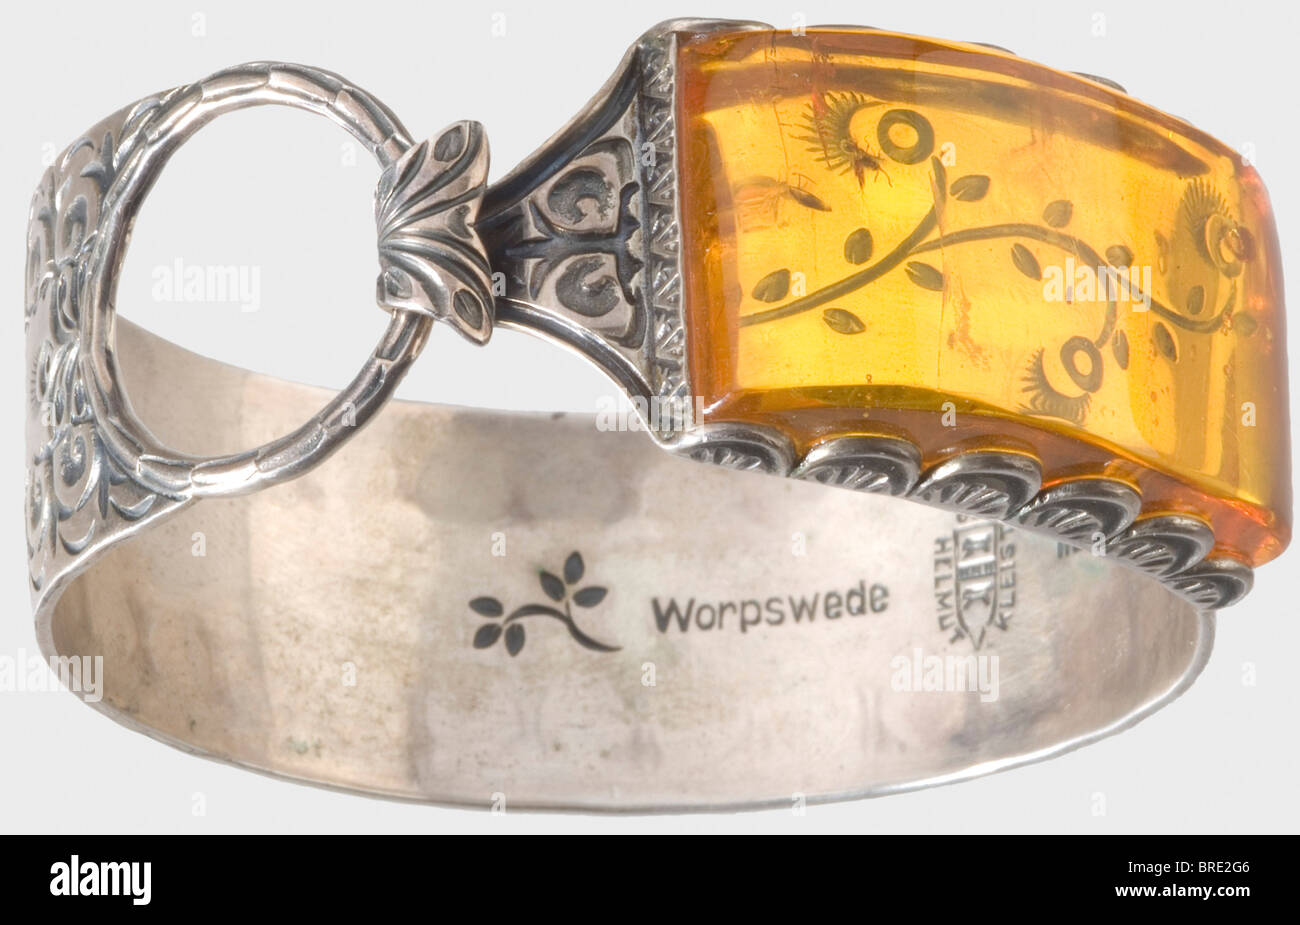 Professor Gerdy Troost, a personal silver bracelet, set with amber Hammered bracelet with finely chiselled blossoms and tendrils, and an applied rectangular amber piece at the catch. Stamped inside with 'Worpswede Handarbeit', the jewekler's mark, 'Helmut v. Kleist', and '835'. Weight 51 g. Diameter 65 mm. Very fine jeweller's craftsmanship. It comes with a copy of a photograph of Gerdy Troost's visit to a painting exhibition in Worpswede during the 30s. historic, historical, 1930s, 20th century, fine arts, art, NS, National Socialism, Nazism, Third Reich, Germ, Stock Photo